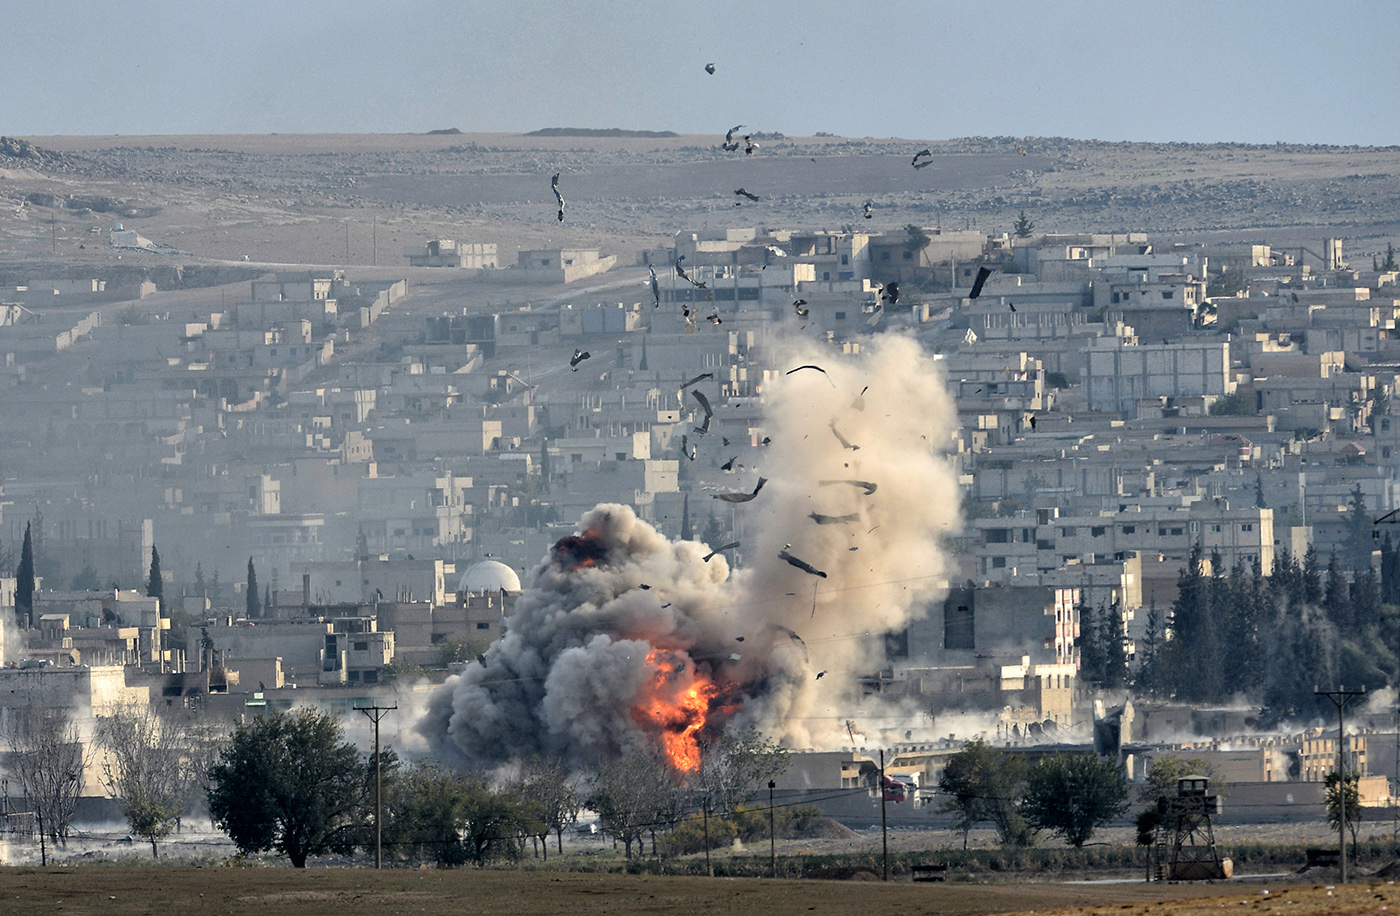 An explosion after an apparent US-led coalition airstrike on Kobane, Syria, as seen from the Turkish side of the border, near Suruc district, Sanliurfa, Turkey, 27 October 2014.